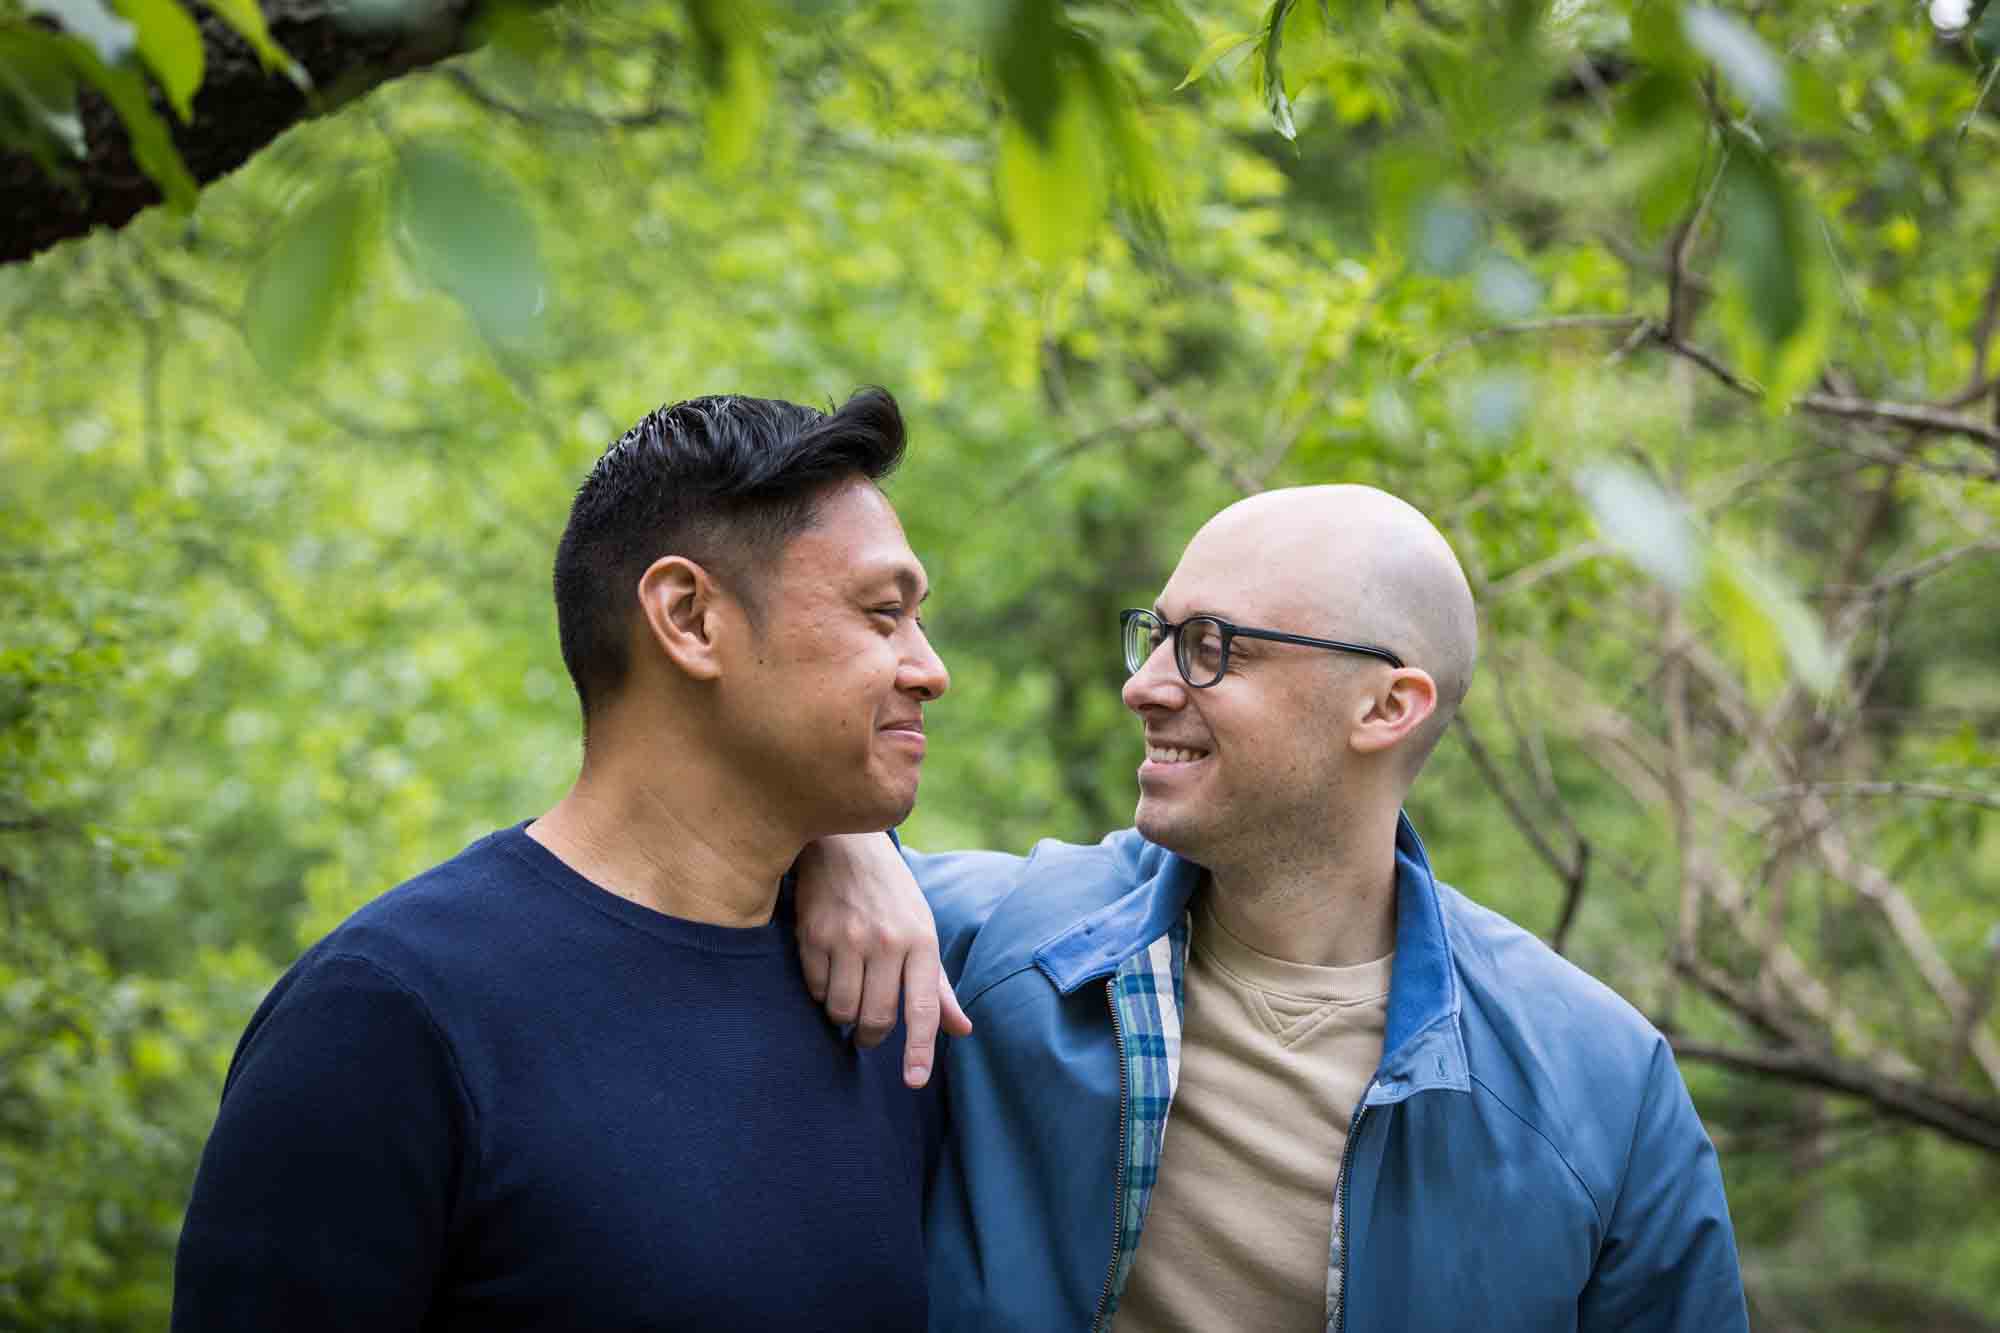 Two men wearing blue looking at each other from a Central Park engagement photo shoot